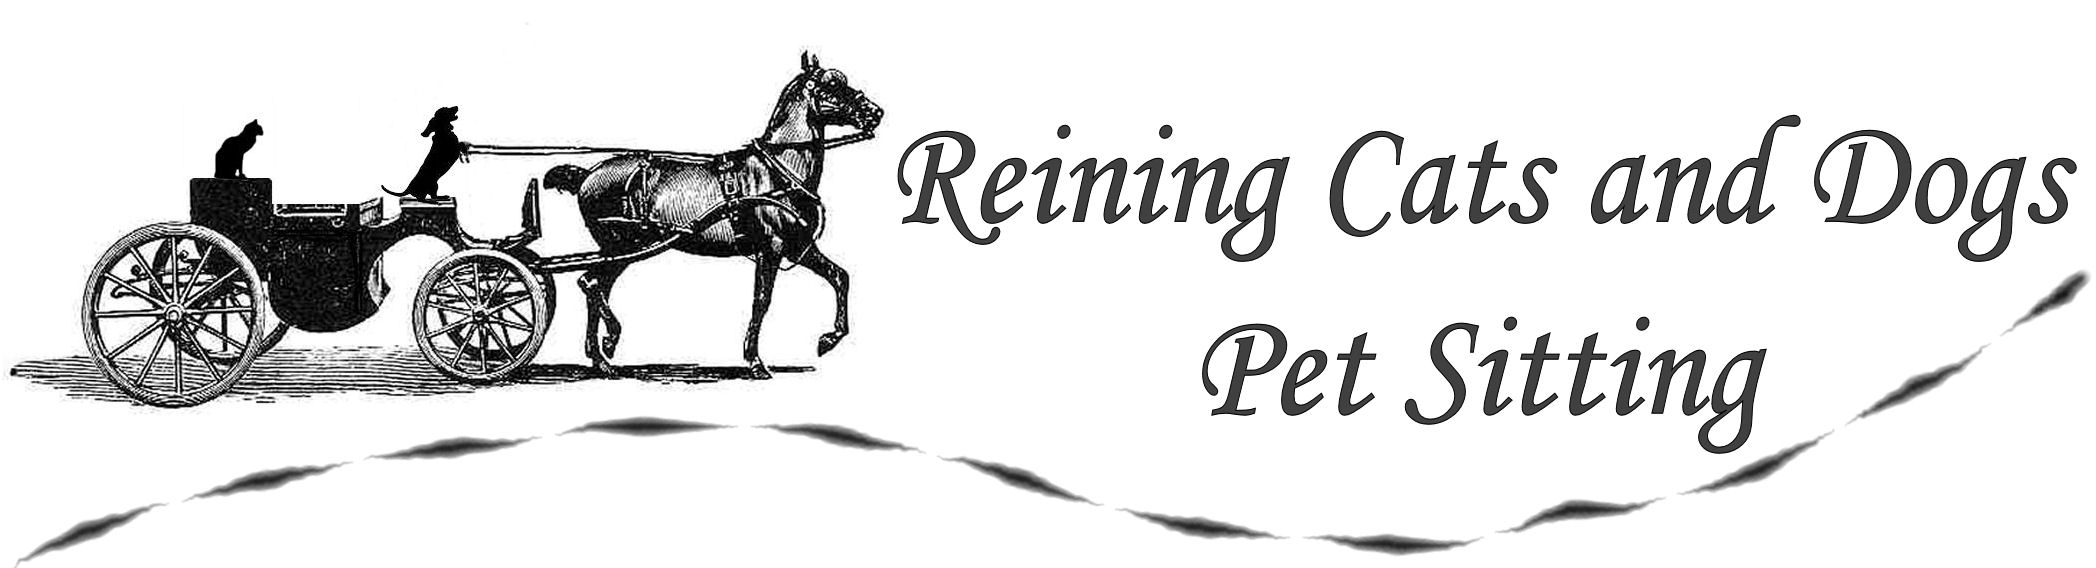 Reining Cats and Dogs Pet Sitting